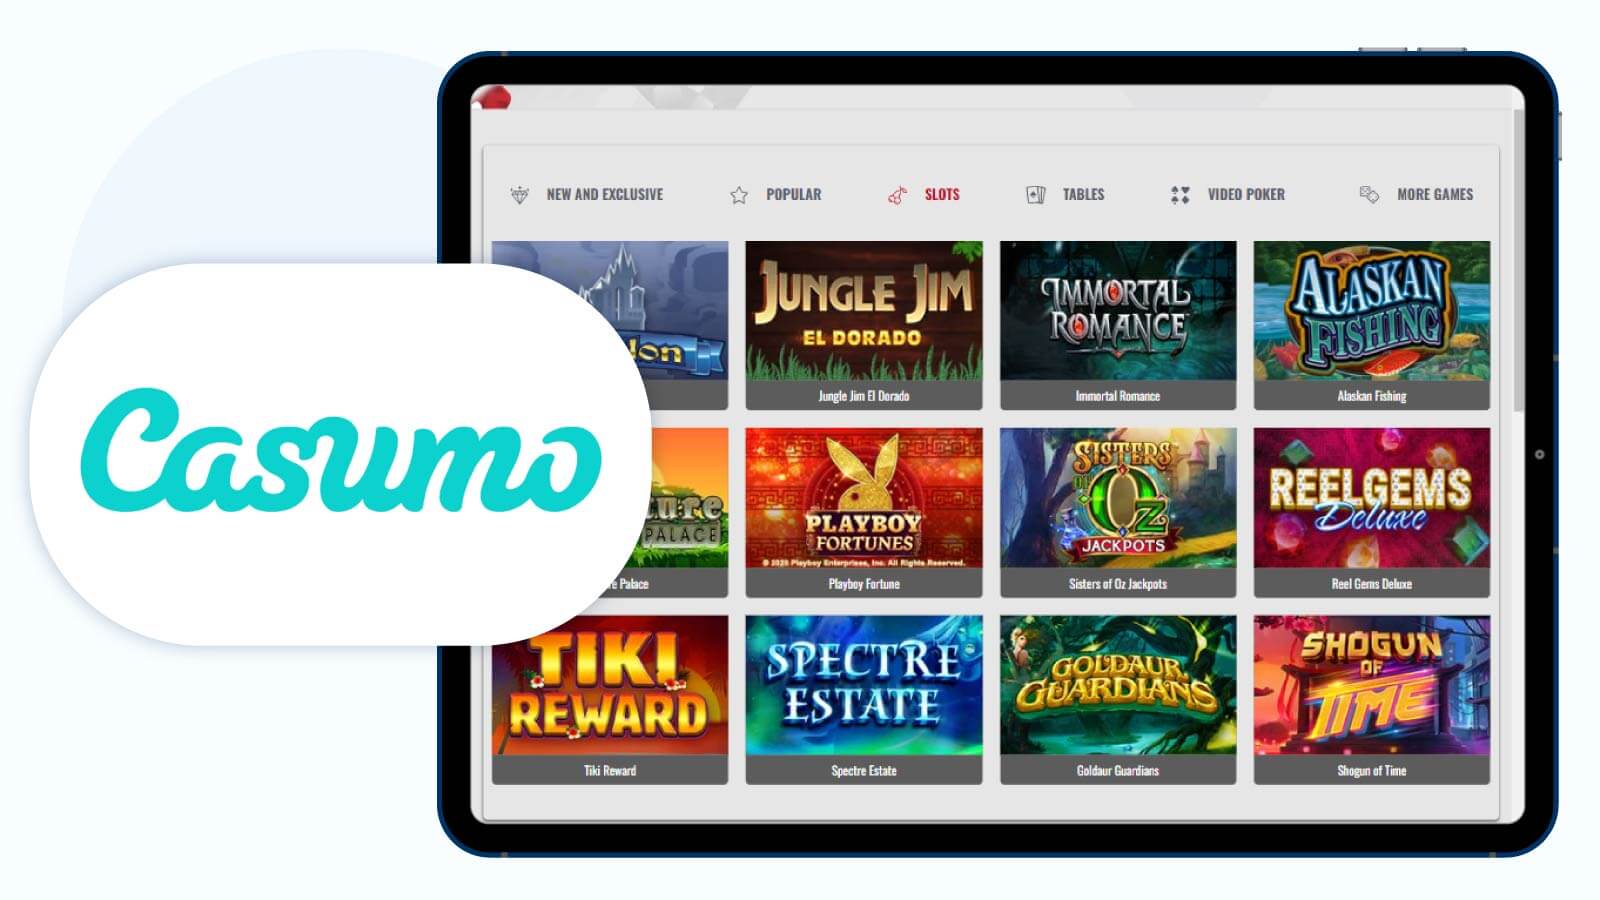 Casumo-Casino-Best-Microgaming-Casino-that-Accepts-Skrill-Payments